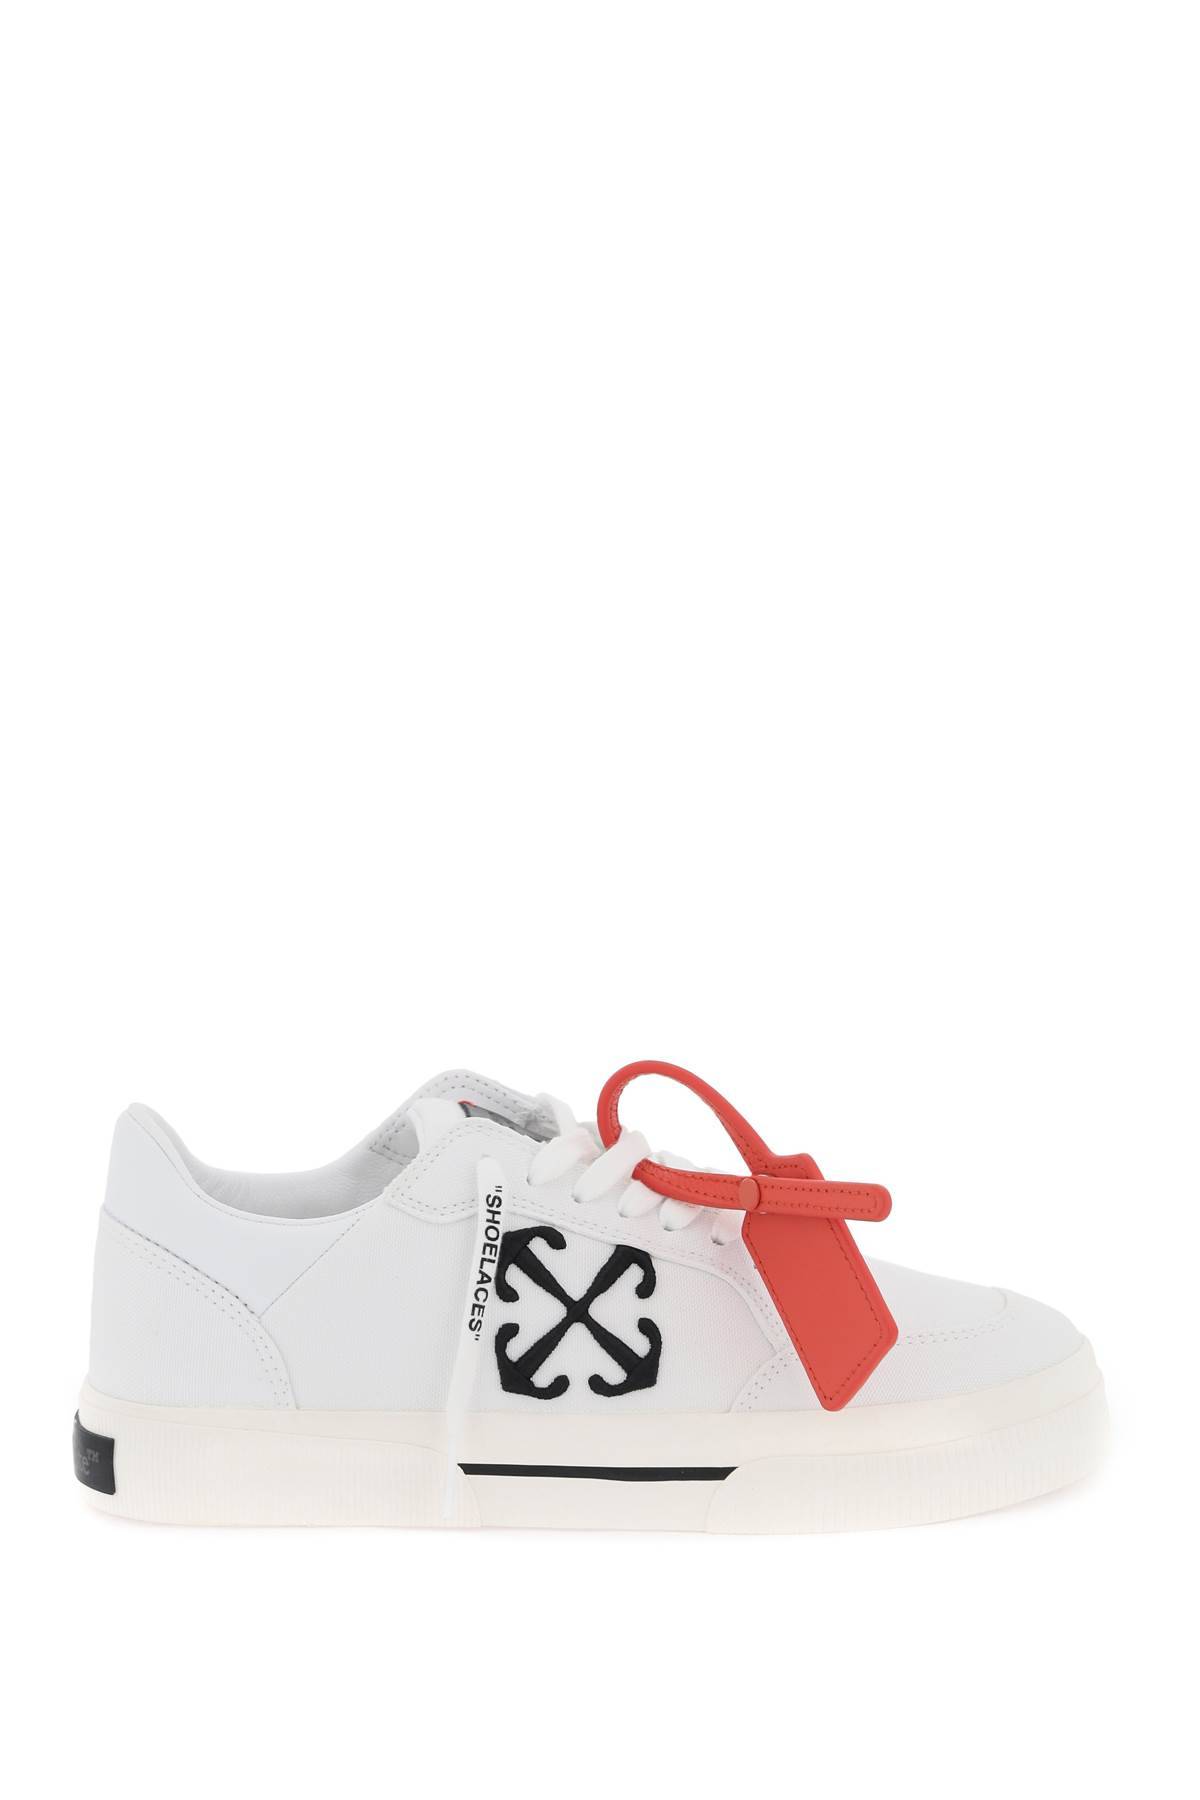 OFF-WHITE OFF-WHITE low canvas vulcanized sneakers in